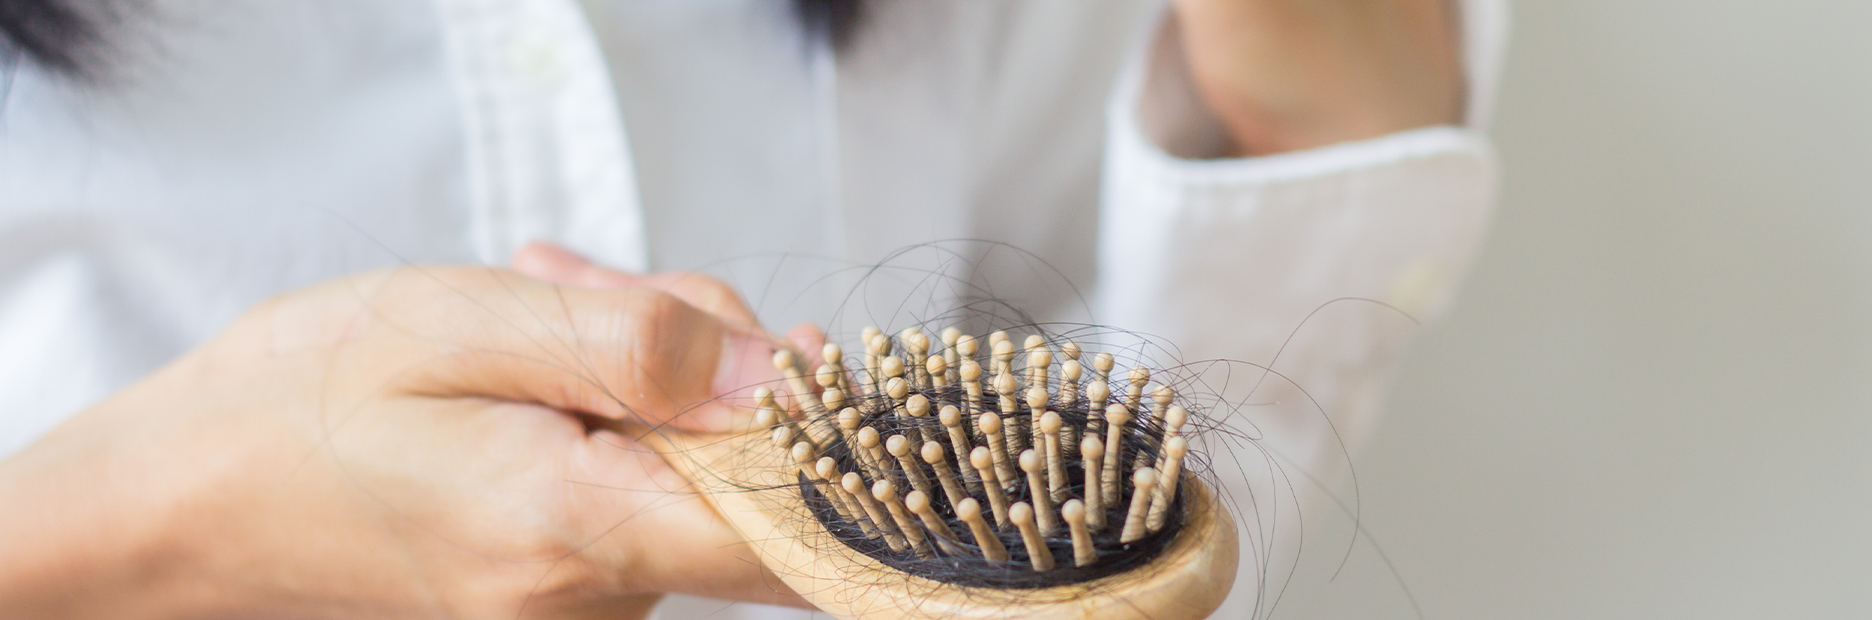 FFOR Hair banner image of woman holding hair brush with strands of hair tangled in brush